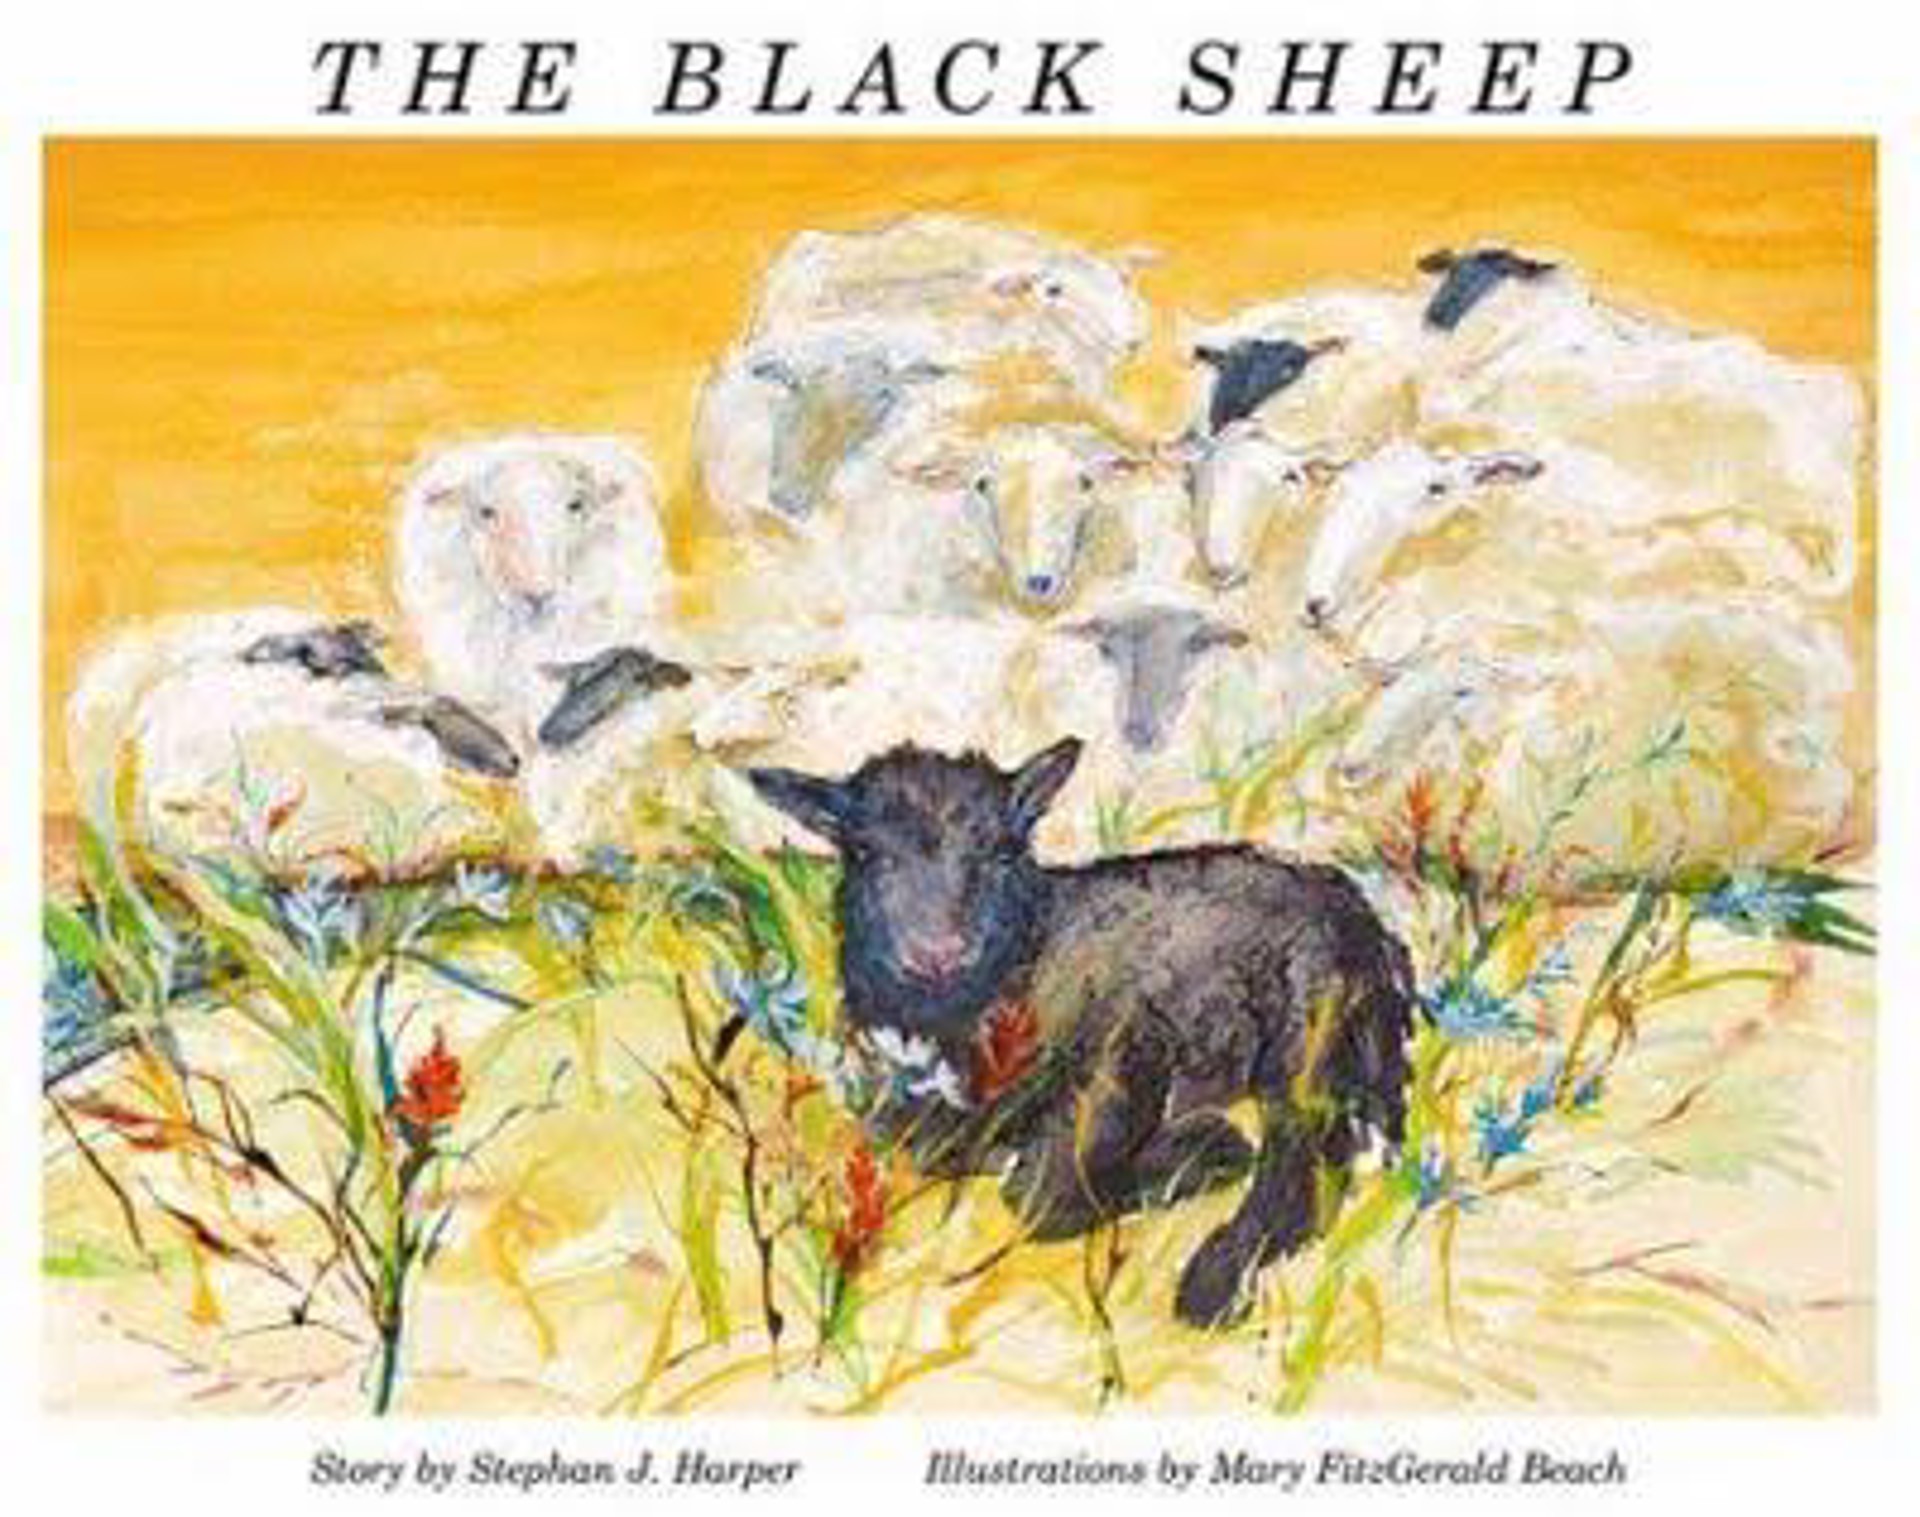 The Black Sheep (book) by Mary FitzGerald Beach